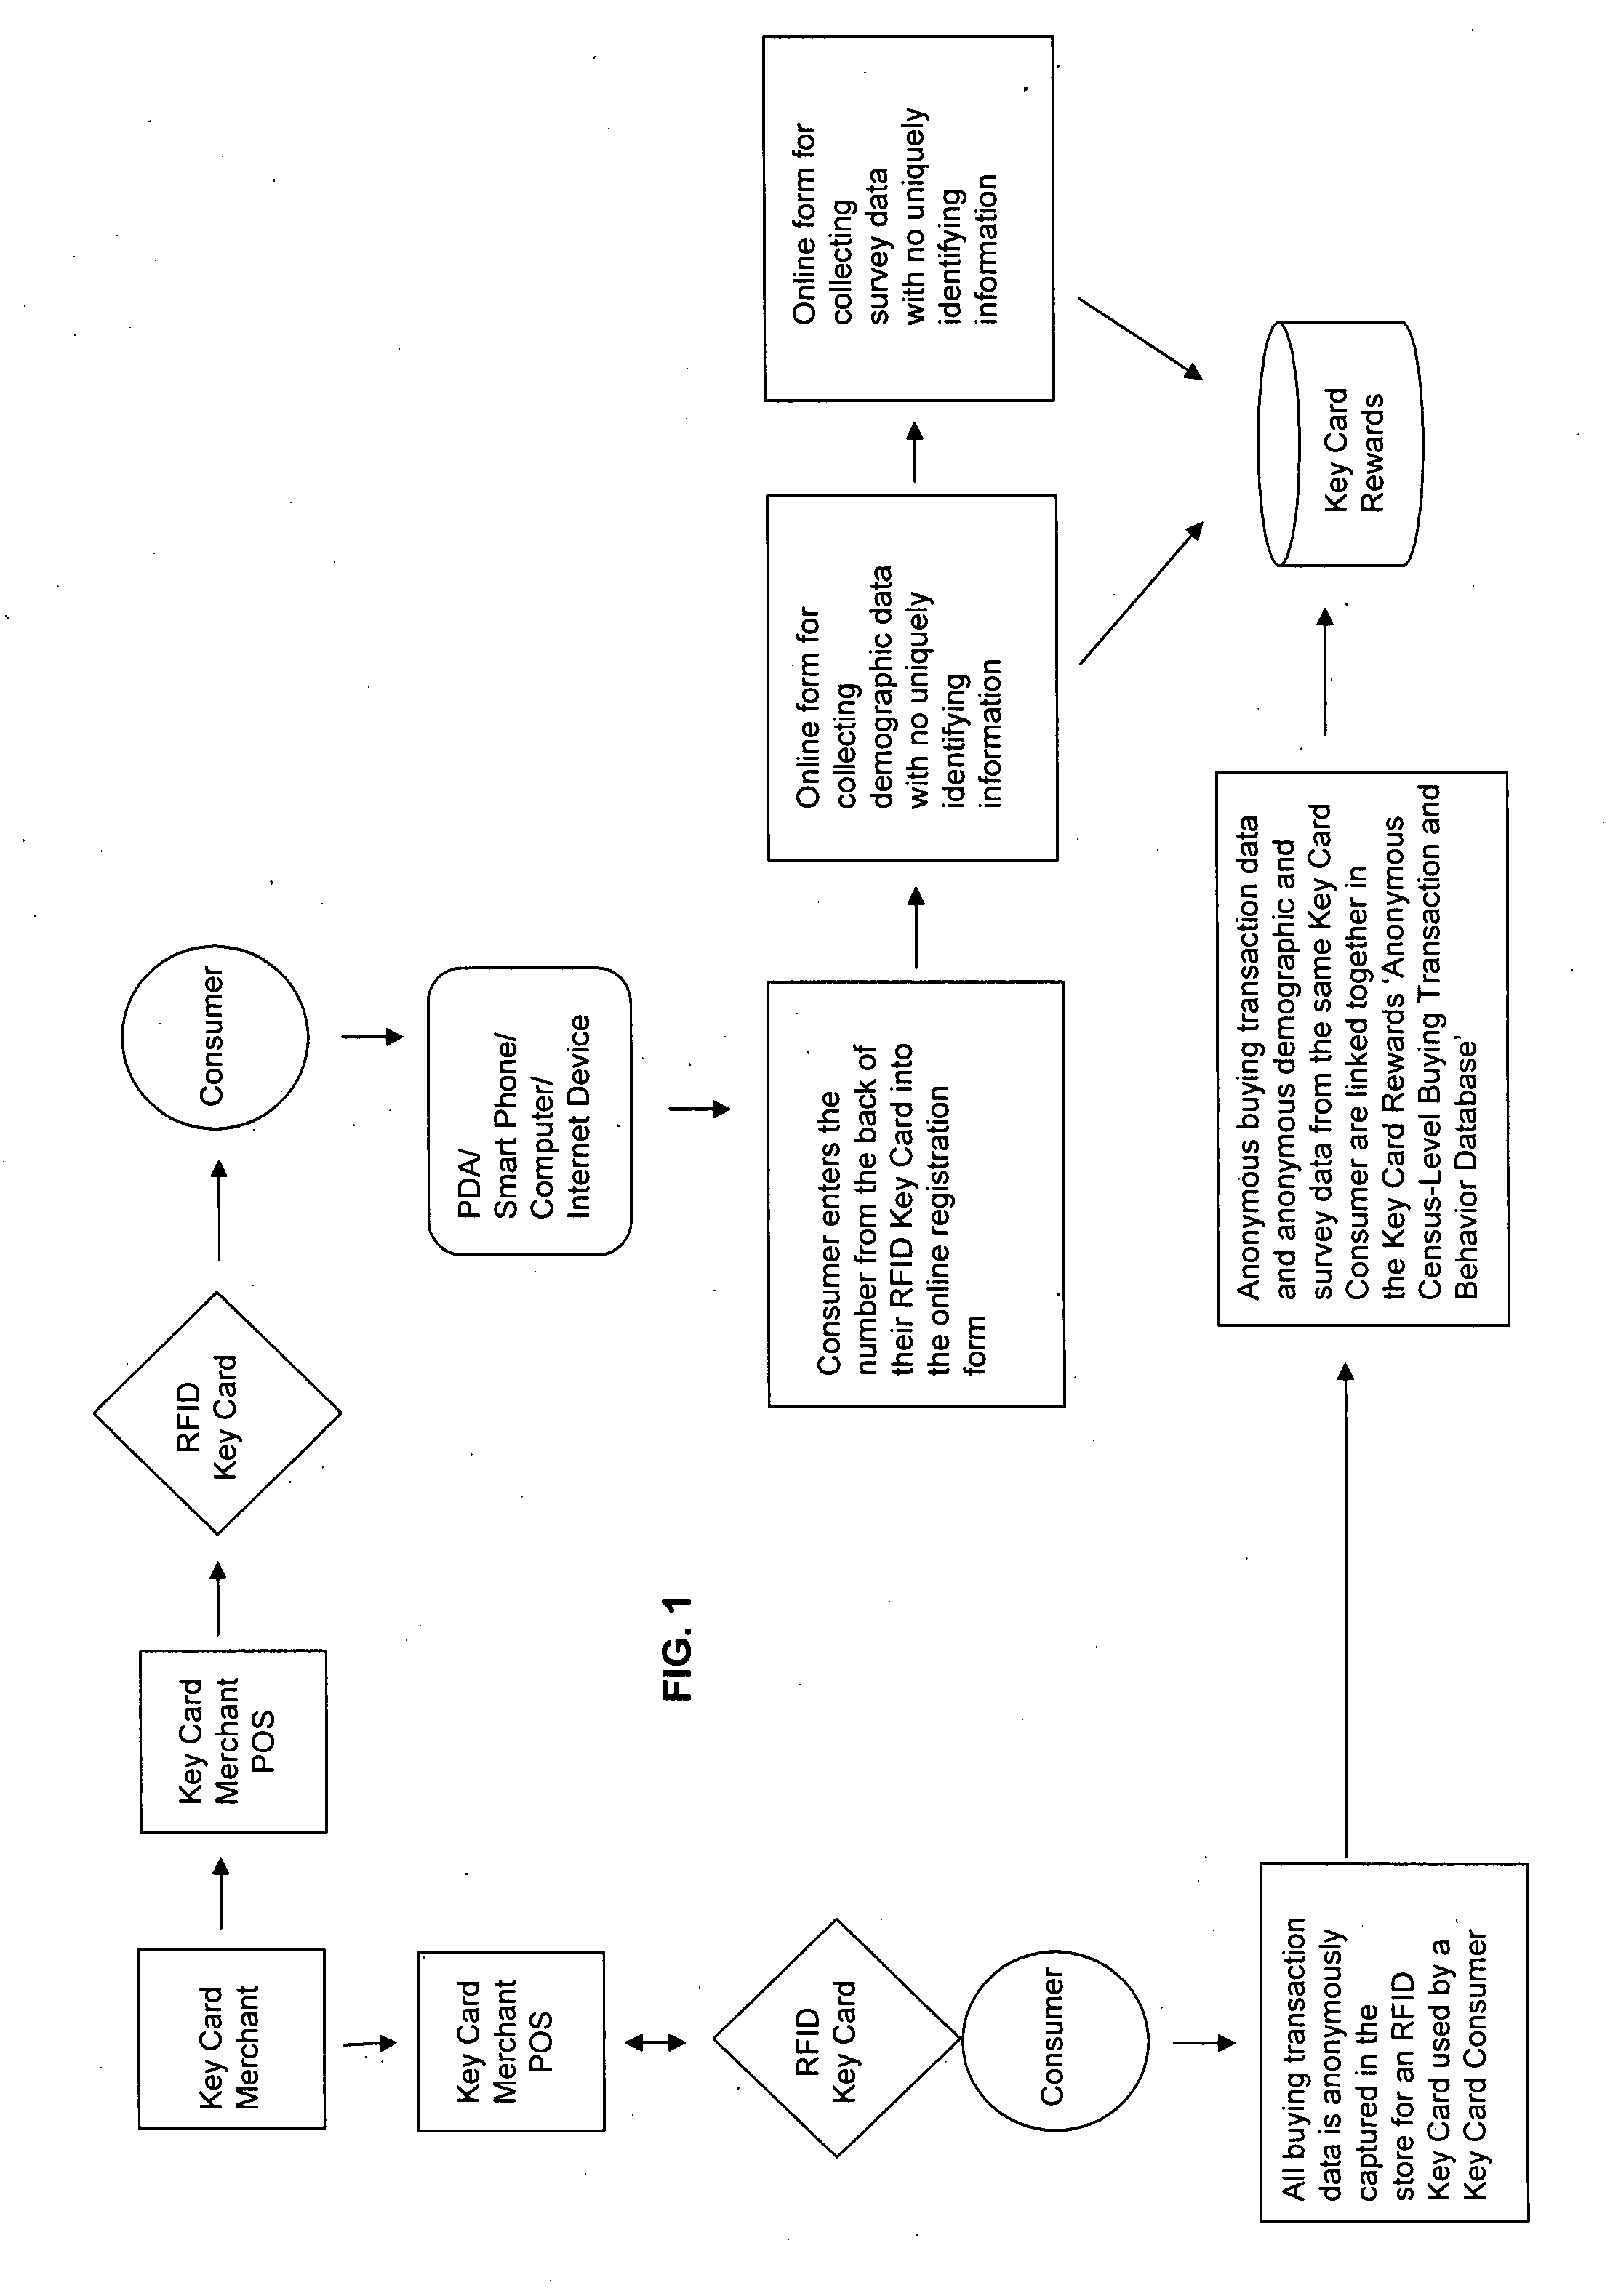 System and method of obtaining and using anonymous data